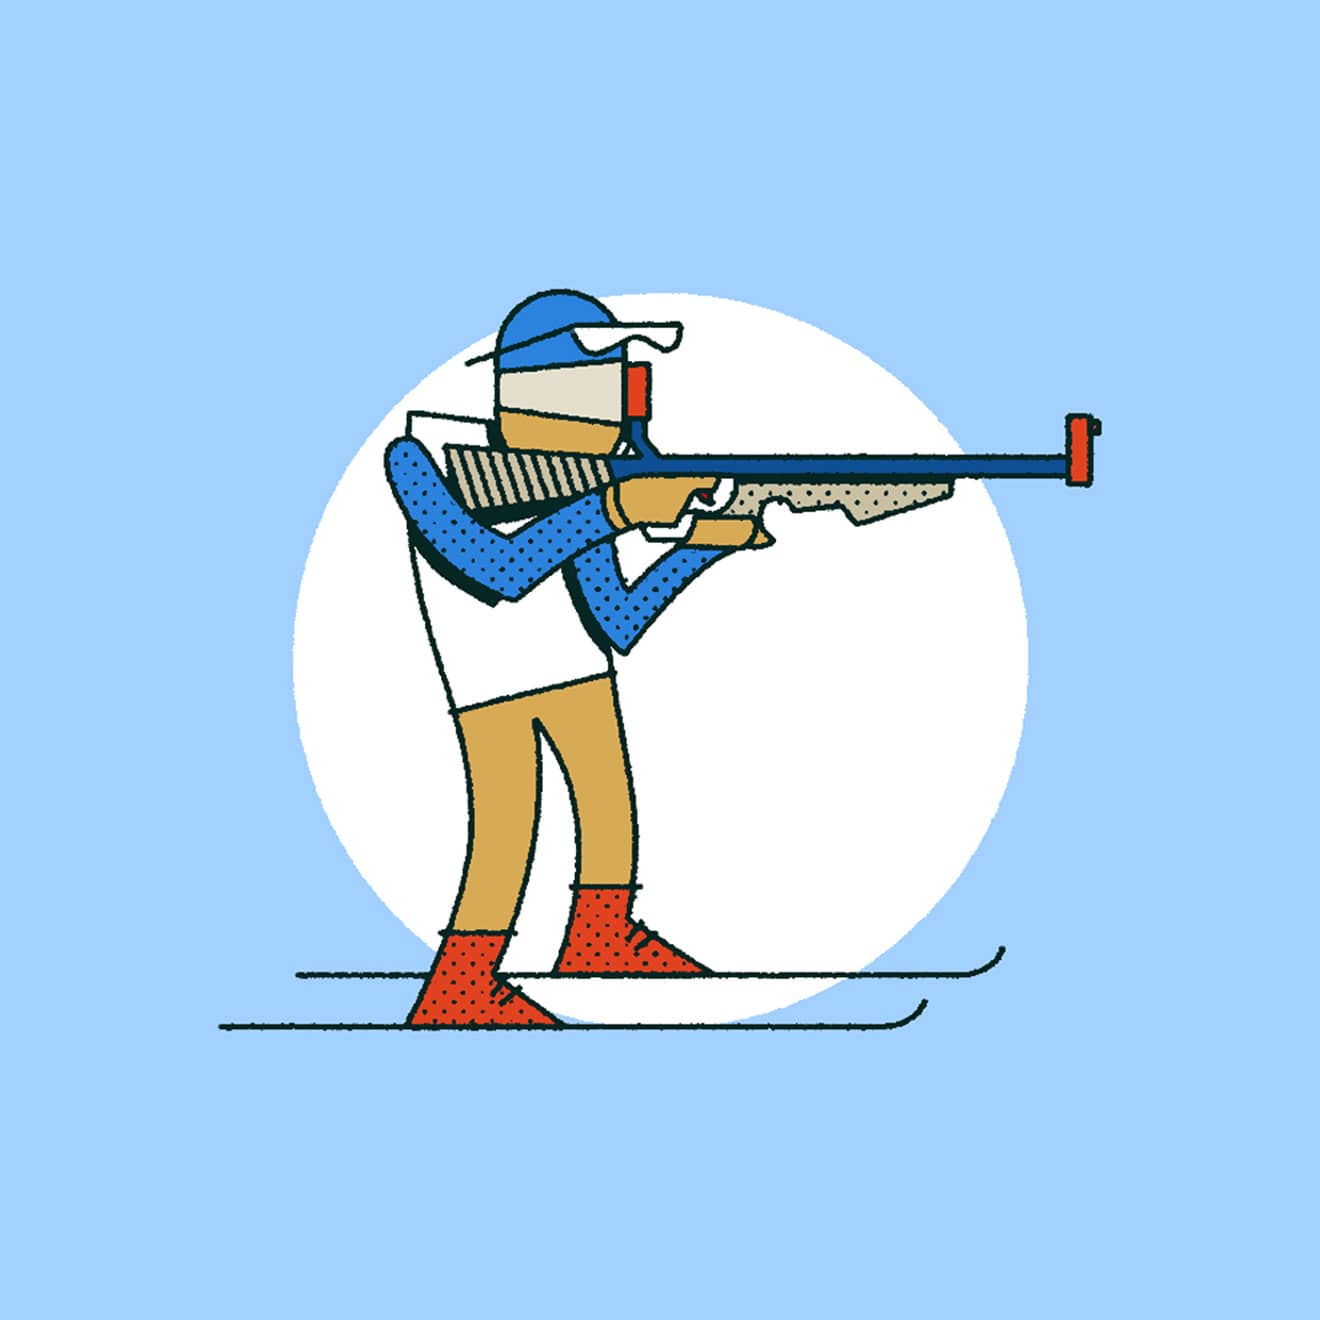 Blue, Red, White & Beige illustration of a person sport shooting